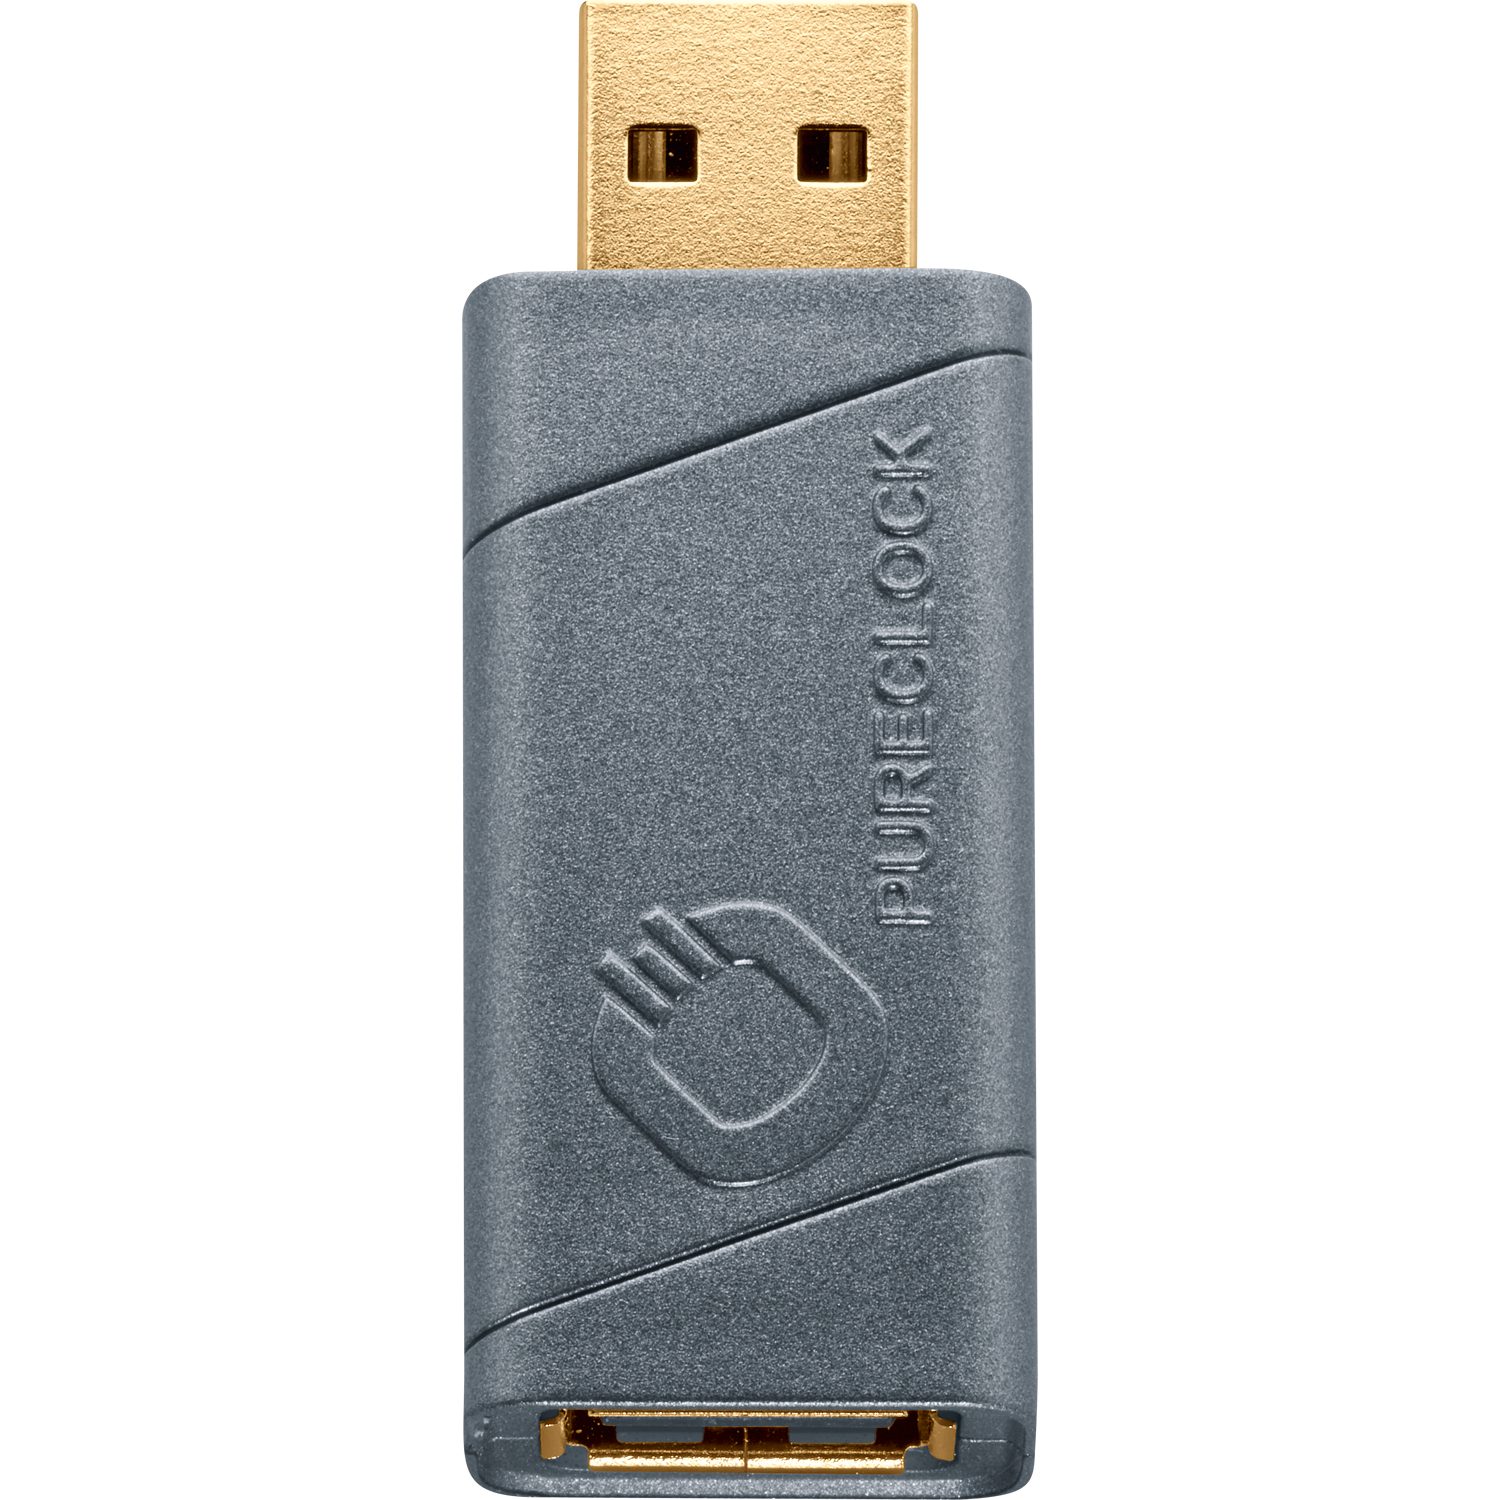 Oehlbach PureClock - USB Jitter Cleaner anthrazit Audio-Adapter